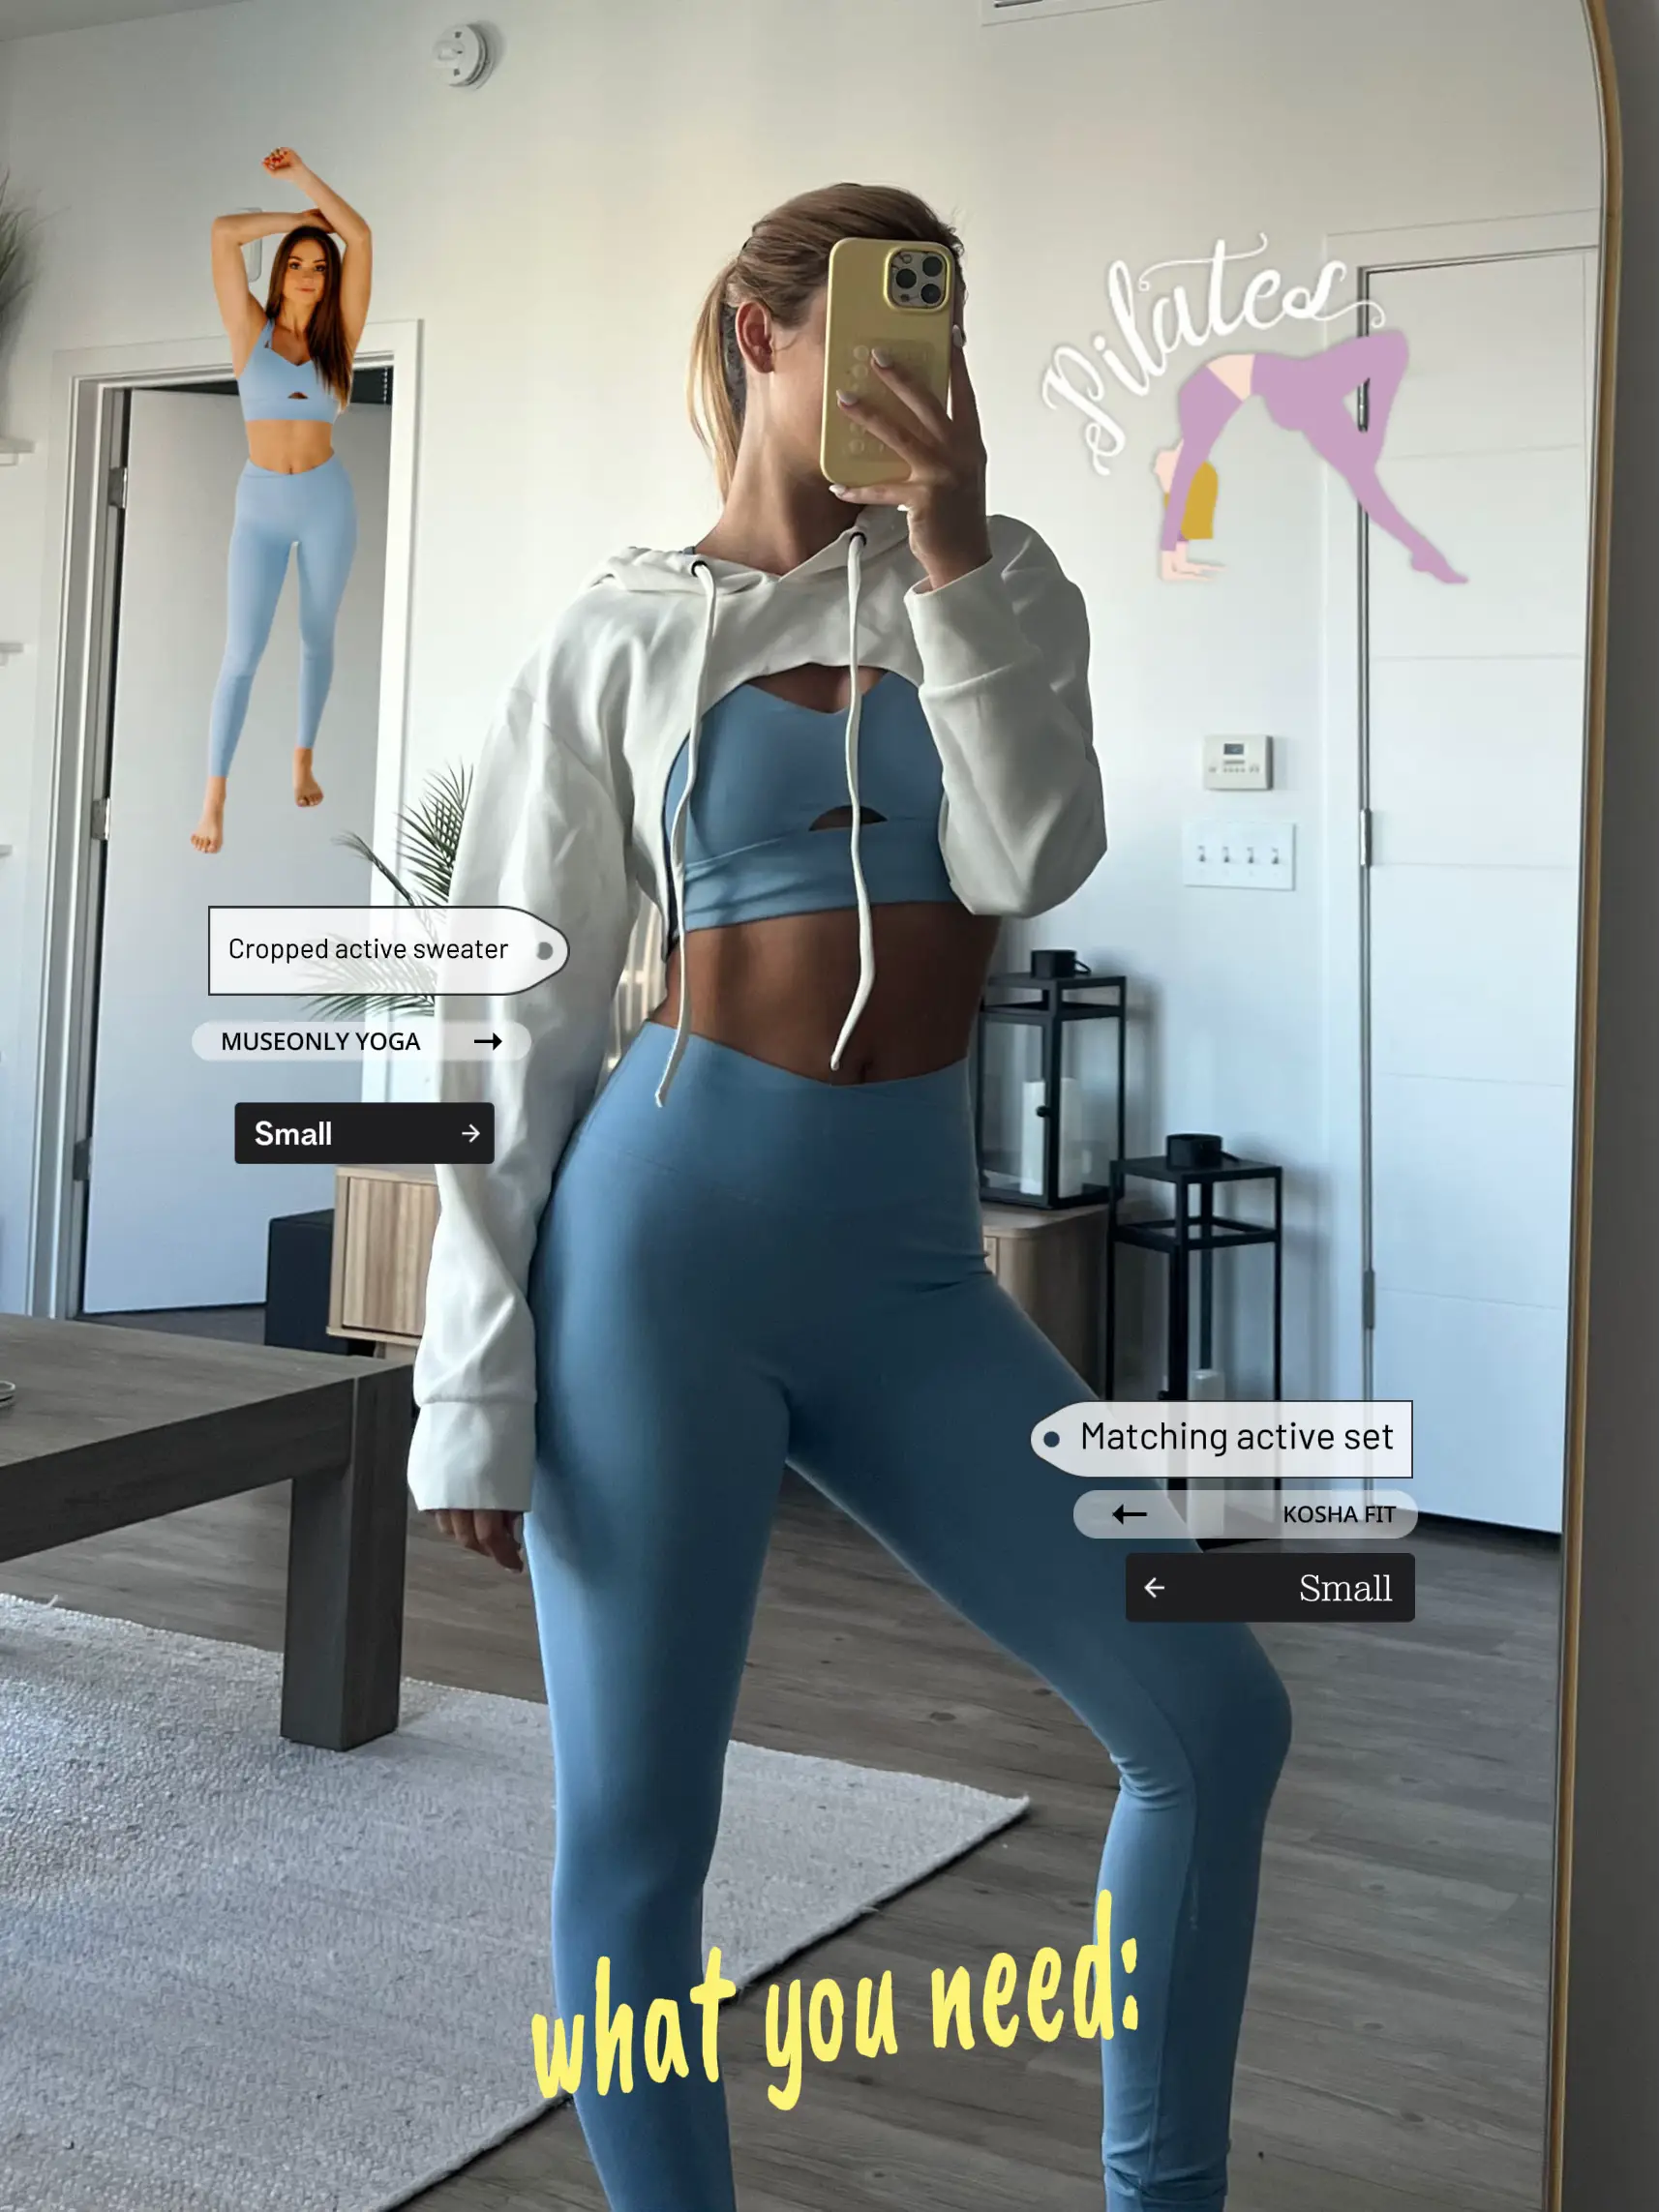 Pilates Princess outfit from this week🤍, Gallery posted by Corryntimm